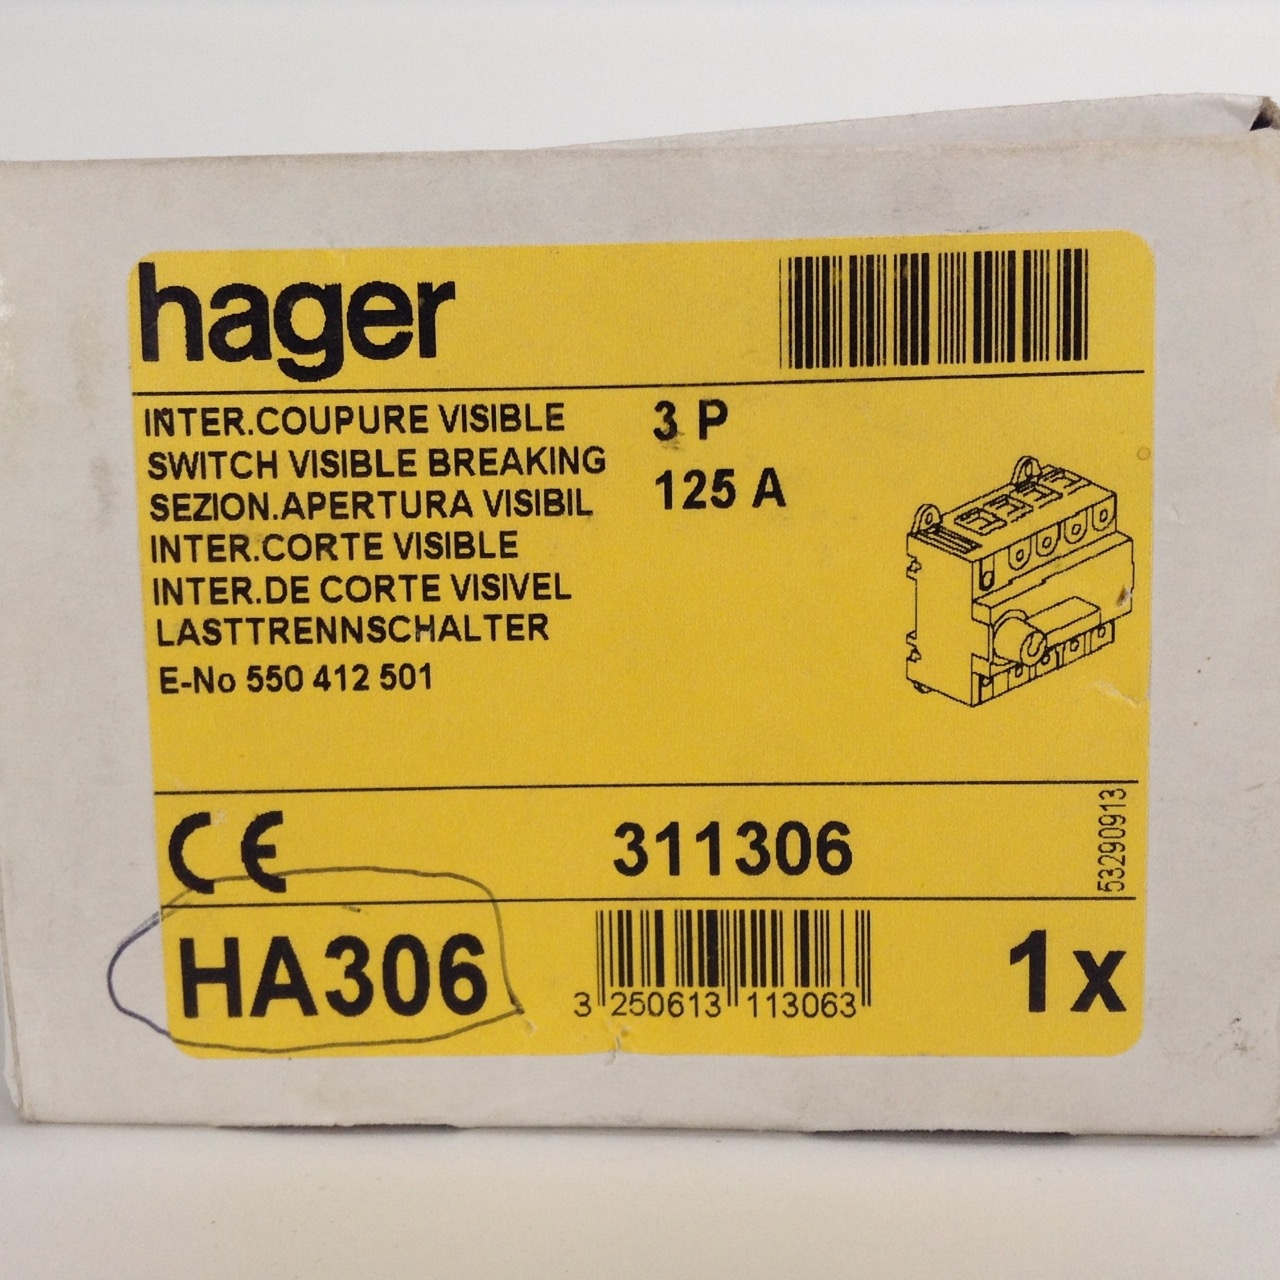 Hager HA306 switch visible breaking Lasttrennschalter 3P 125A New NFP